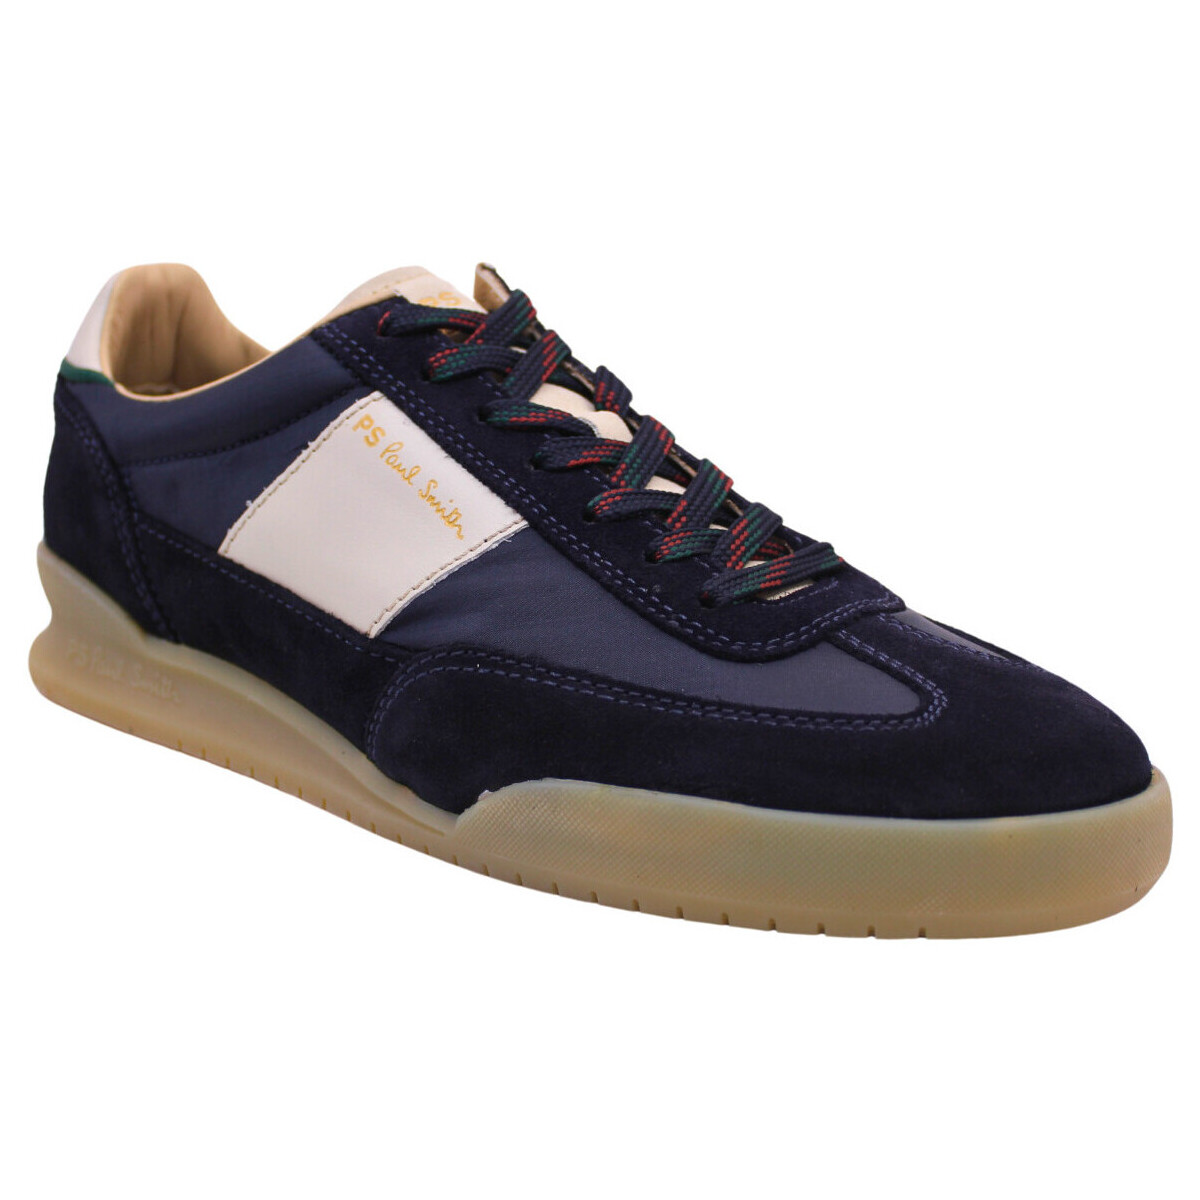 Chaussures Femme Baskets mode Paul Smith Paul Smith Baskets Marine